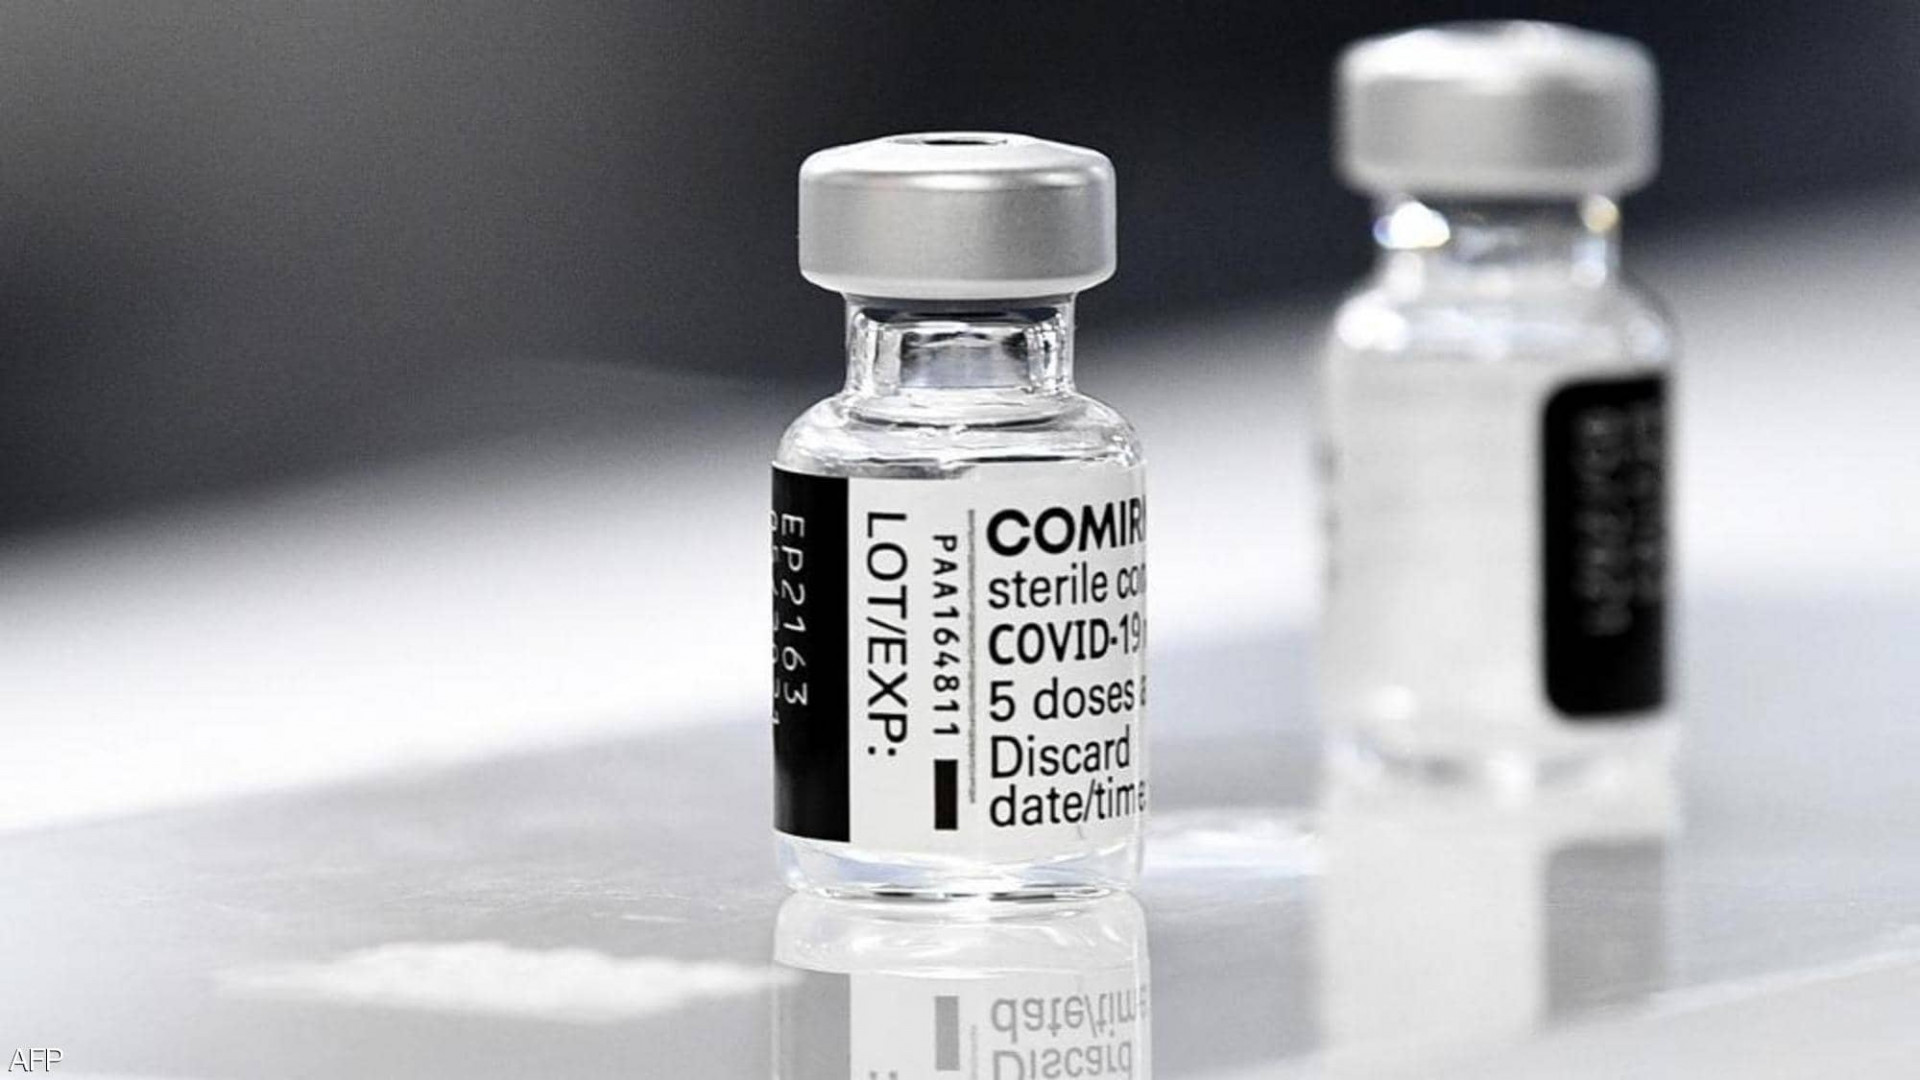 Lab test shows Pfizer Covid vaccine is effective against Brazil variant, Study